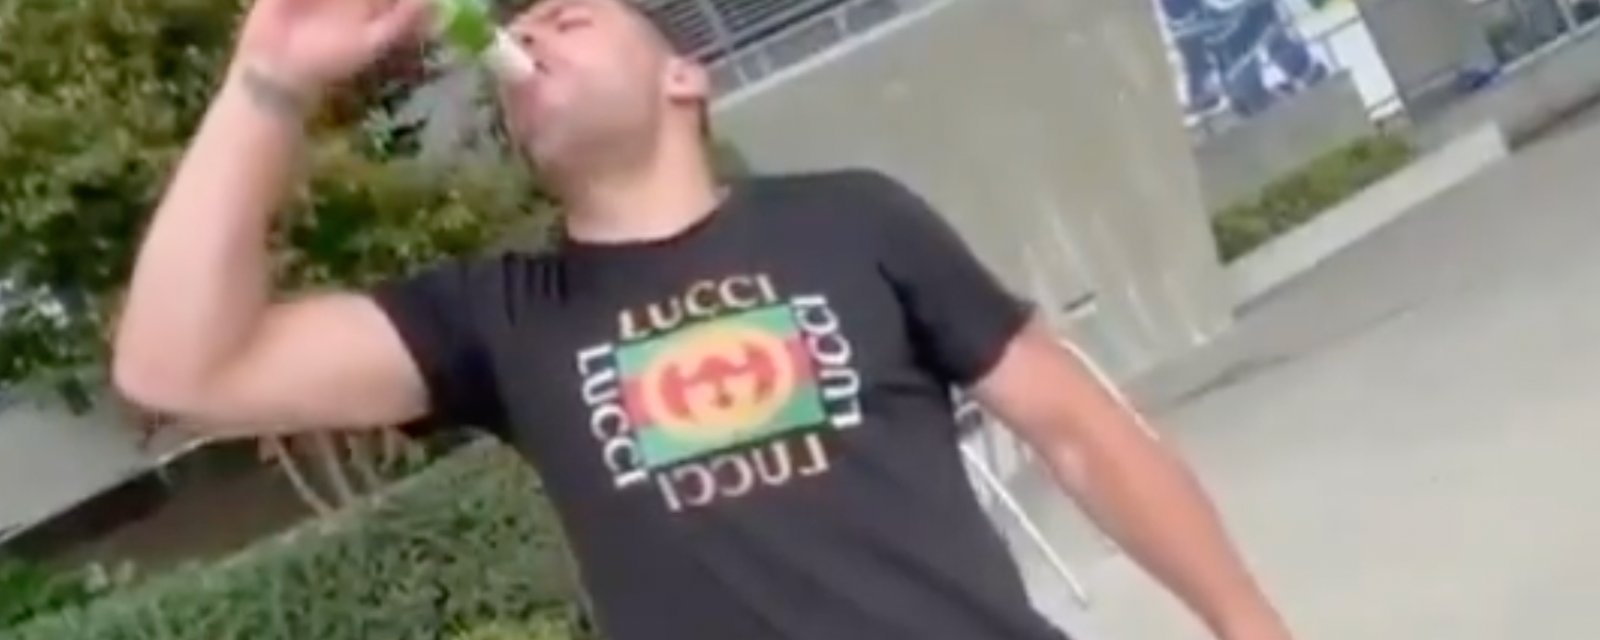 Milan Lucic dedicates awkward video to Bruins as he chugs beers in Vancouver 